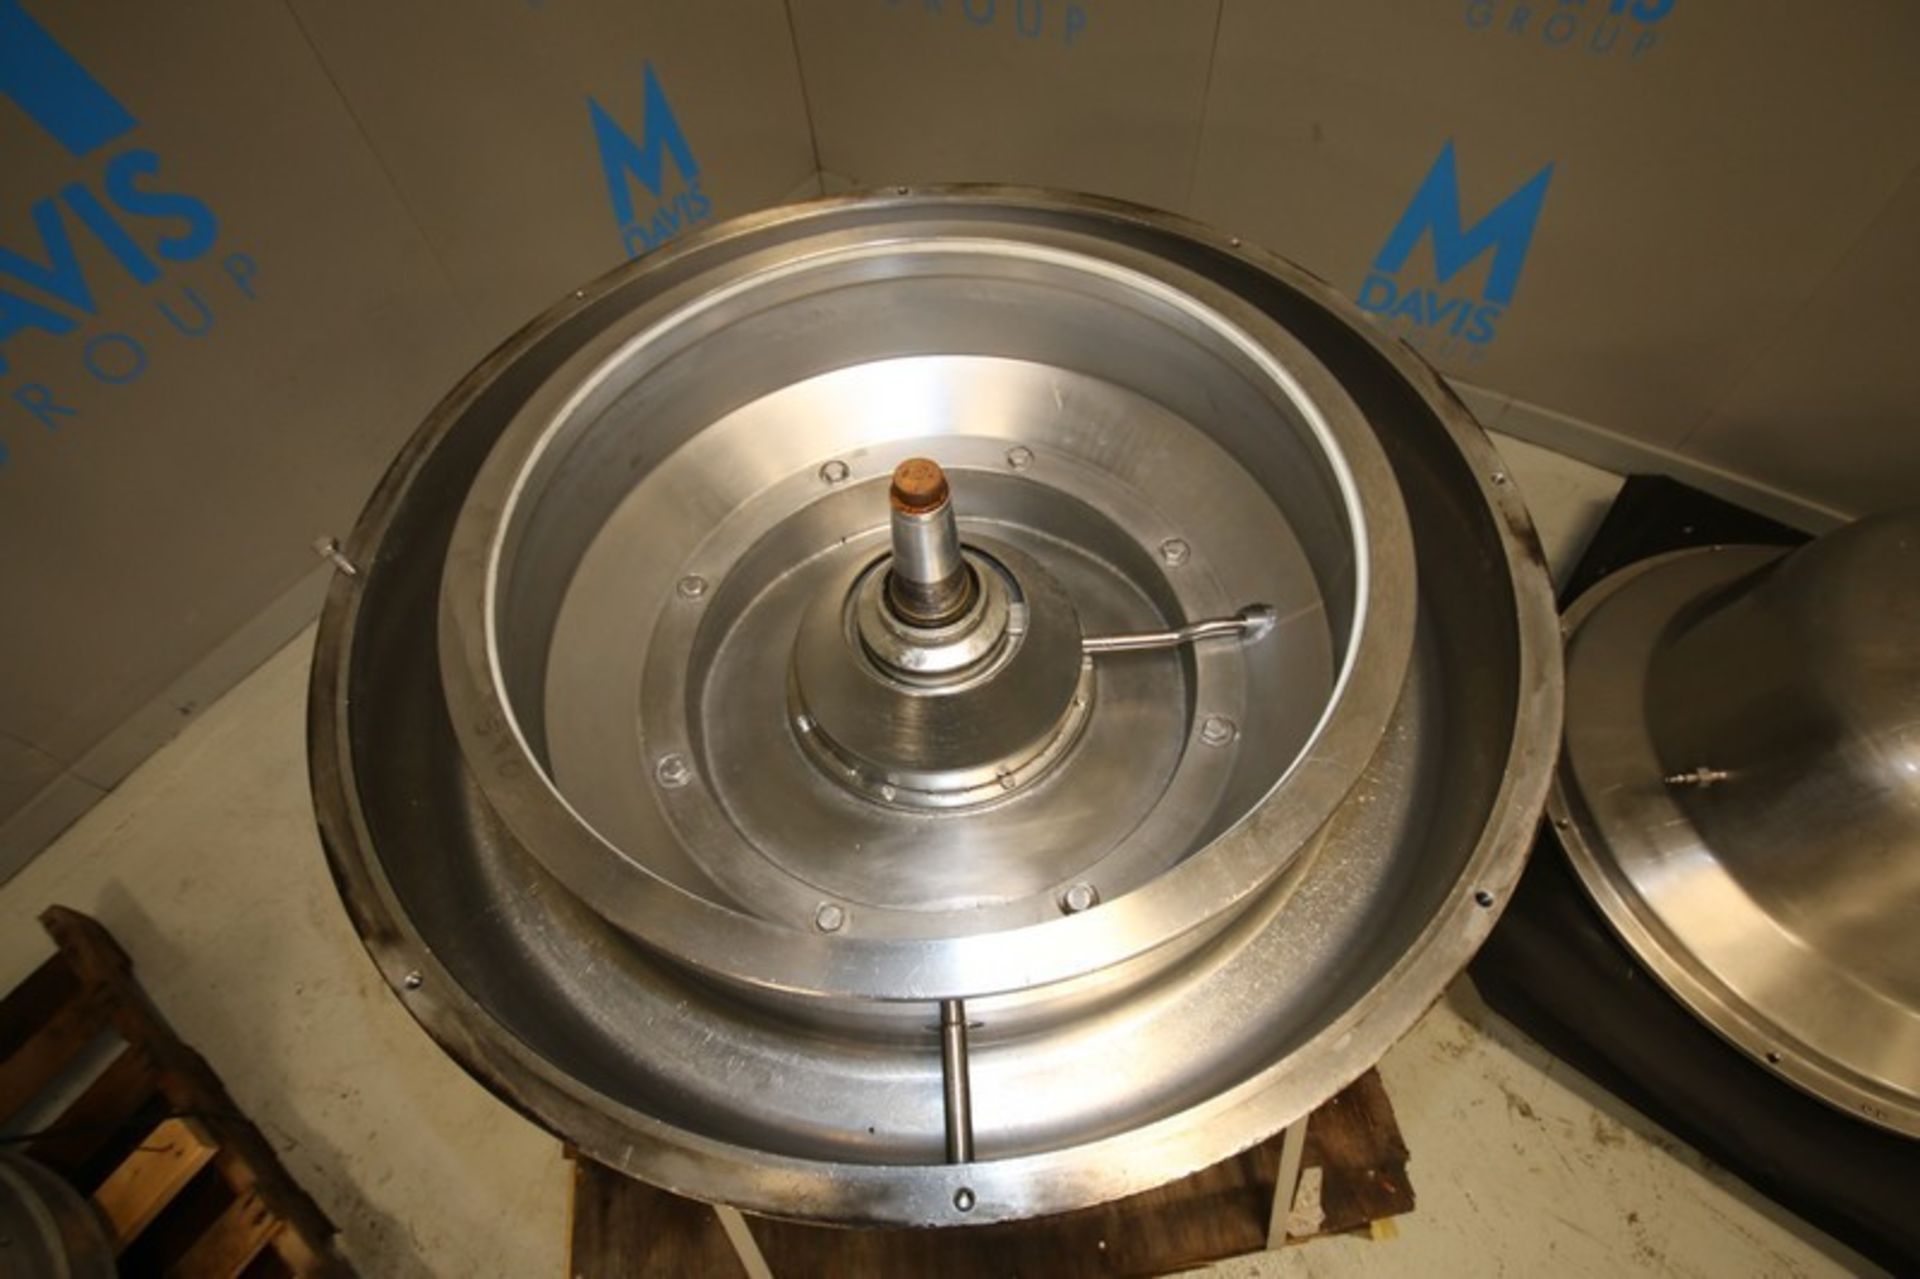 Westfalia CIP S/S Separator,Model MSA 200-01-076, SN 1652530, Includes Bowl Assembly, Lid, Top Cream - Image 3 of 26